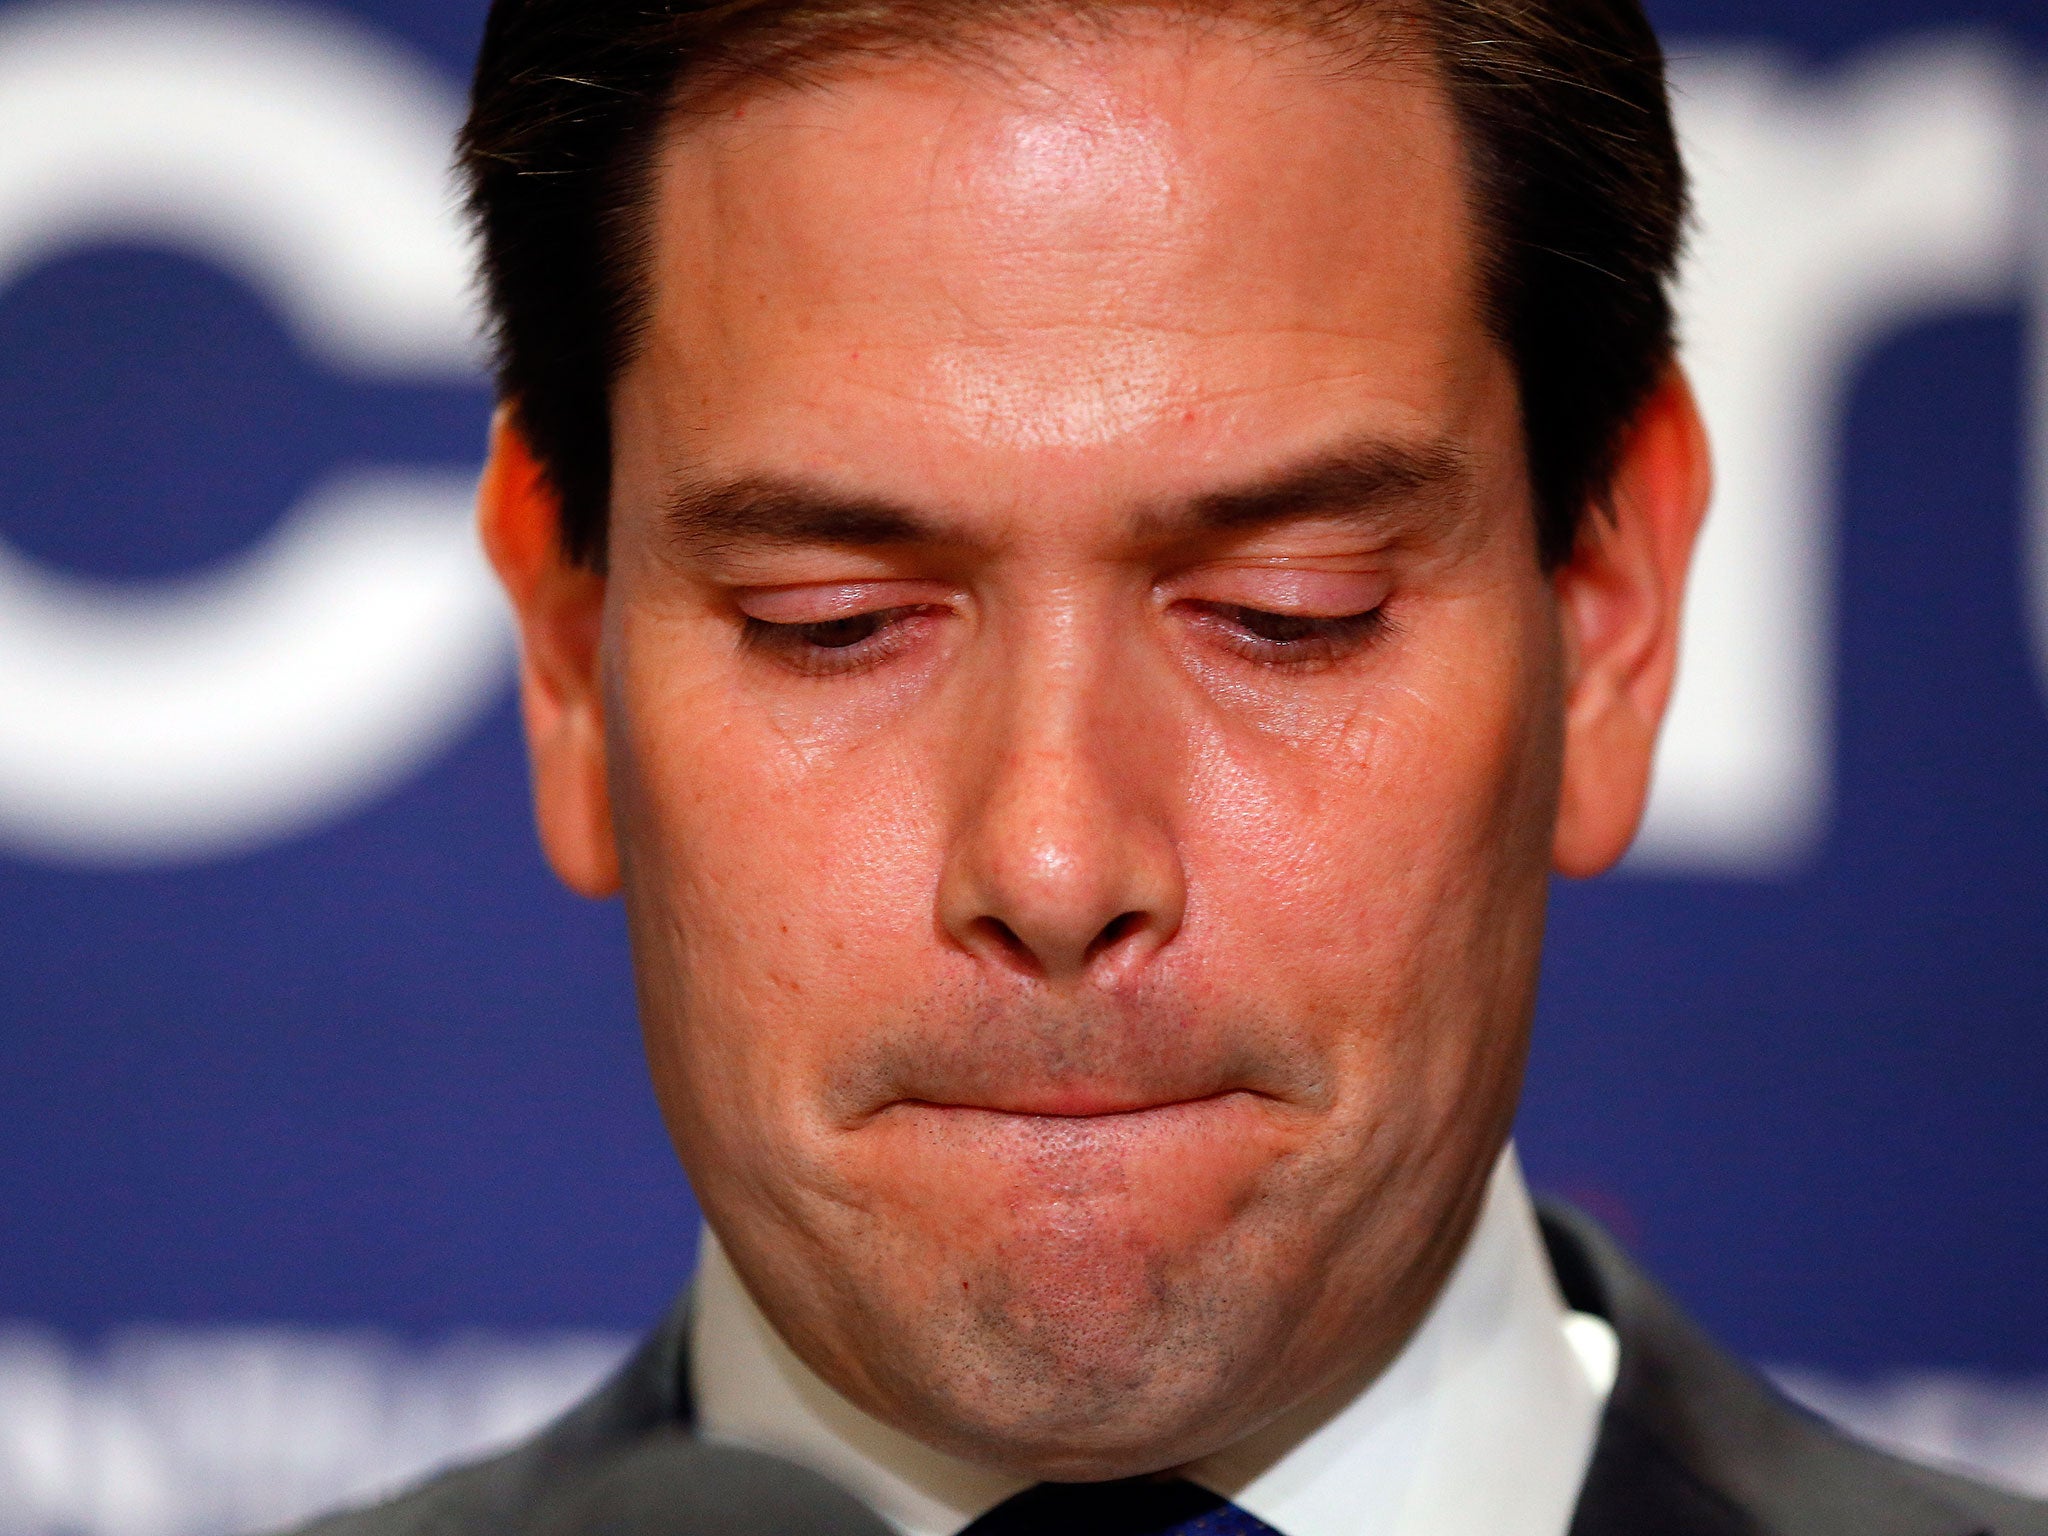 Mr Rubio quit the presidential race in March